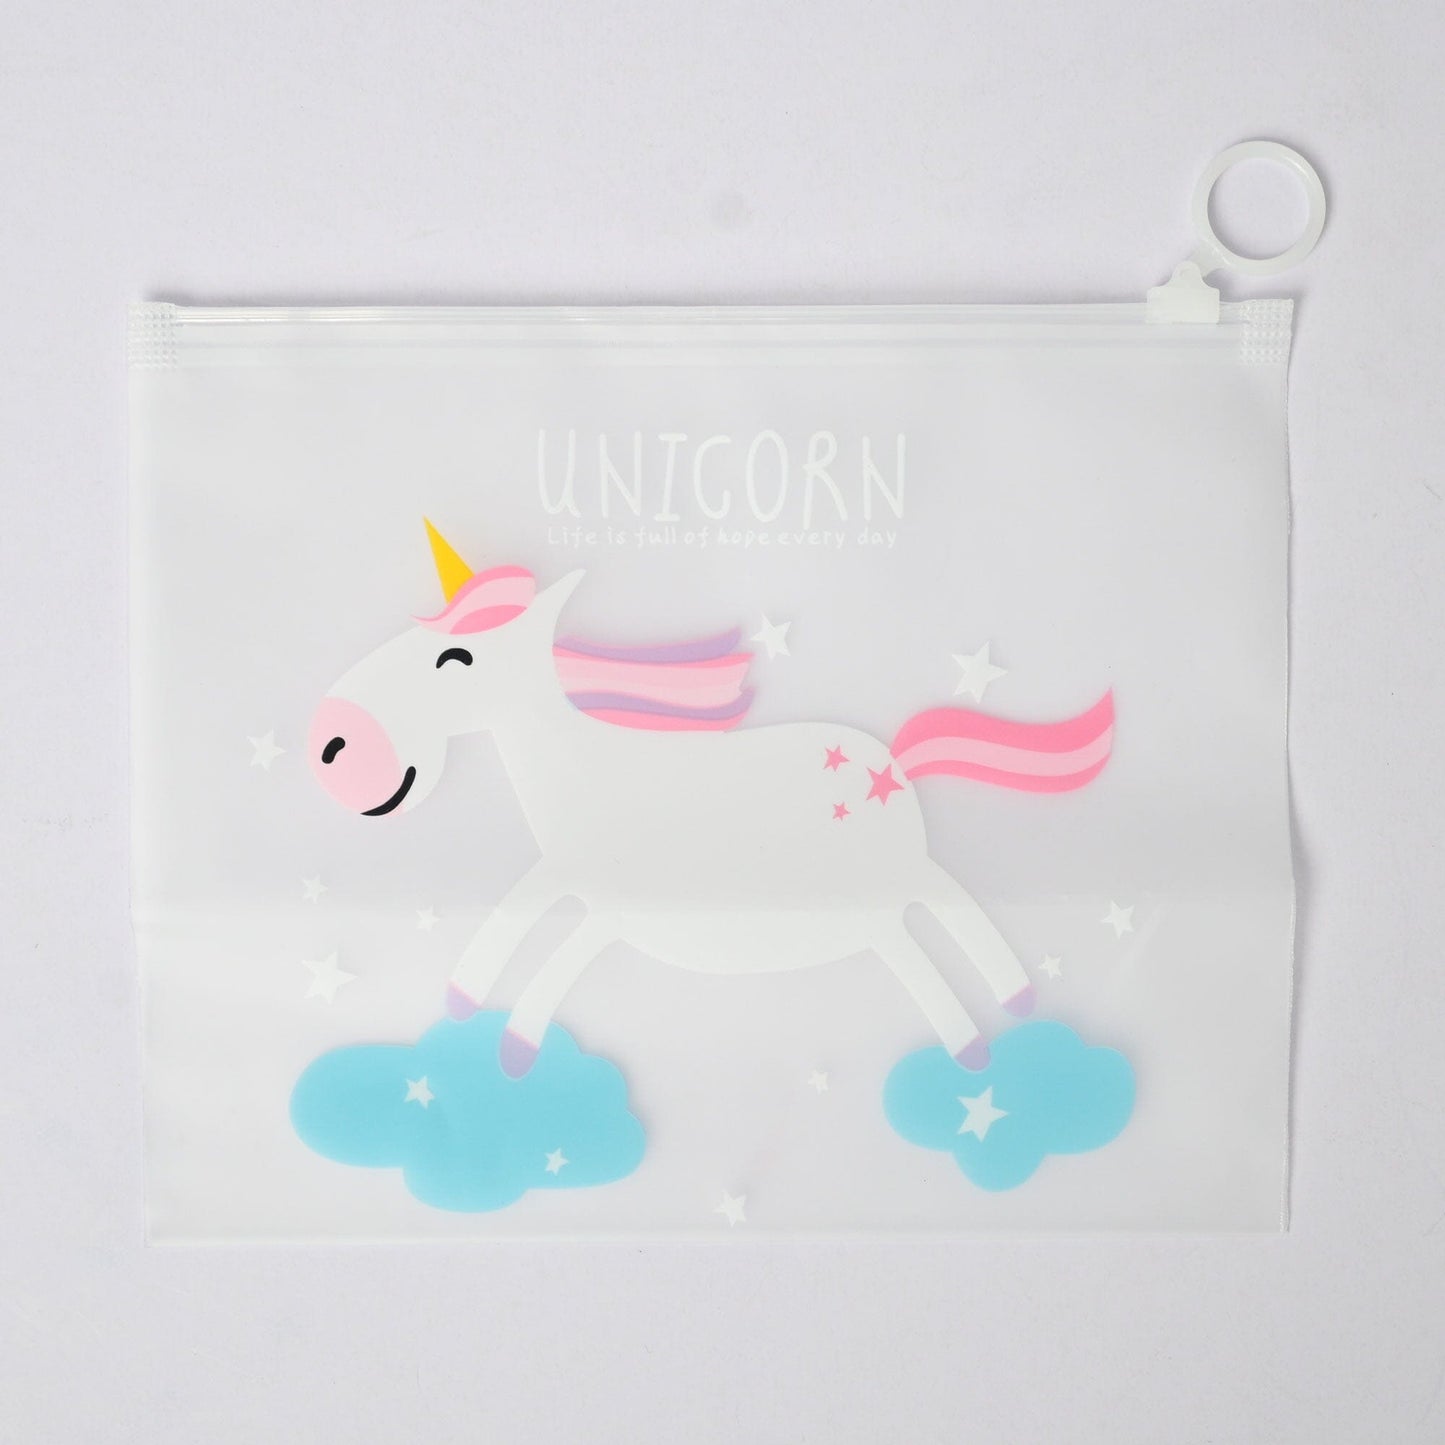 Unicorn Magical Transparent Water Resistant Stationary Pouch Stationary & General Accessories SRL D2 